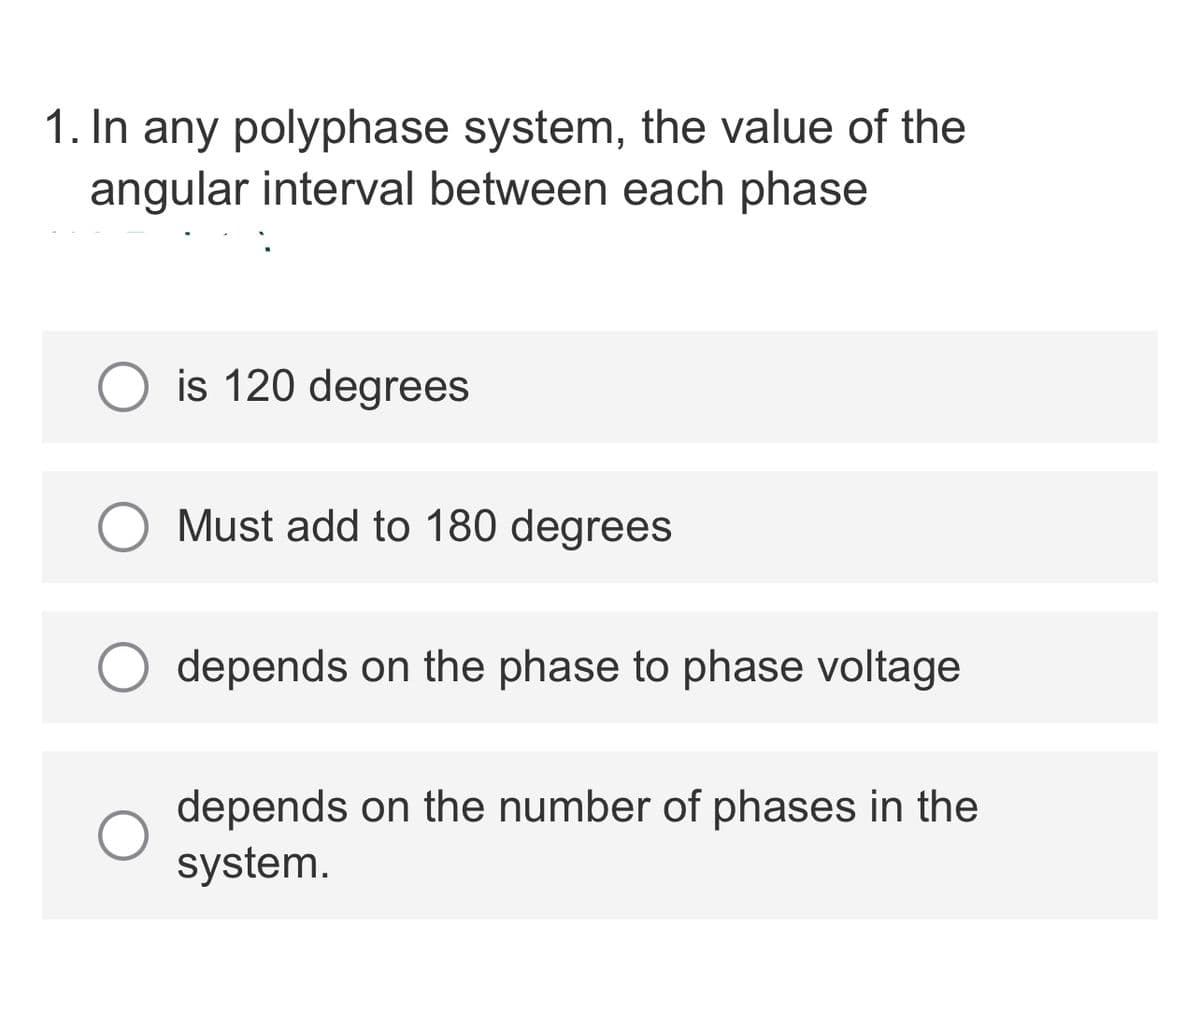 1. In any polyphase system, the value of the
angular interval between each phase
O is 120 degrees
Must add to 180 degrees
depends on the phase to phase voltage
depends on the number of phases in the
system.